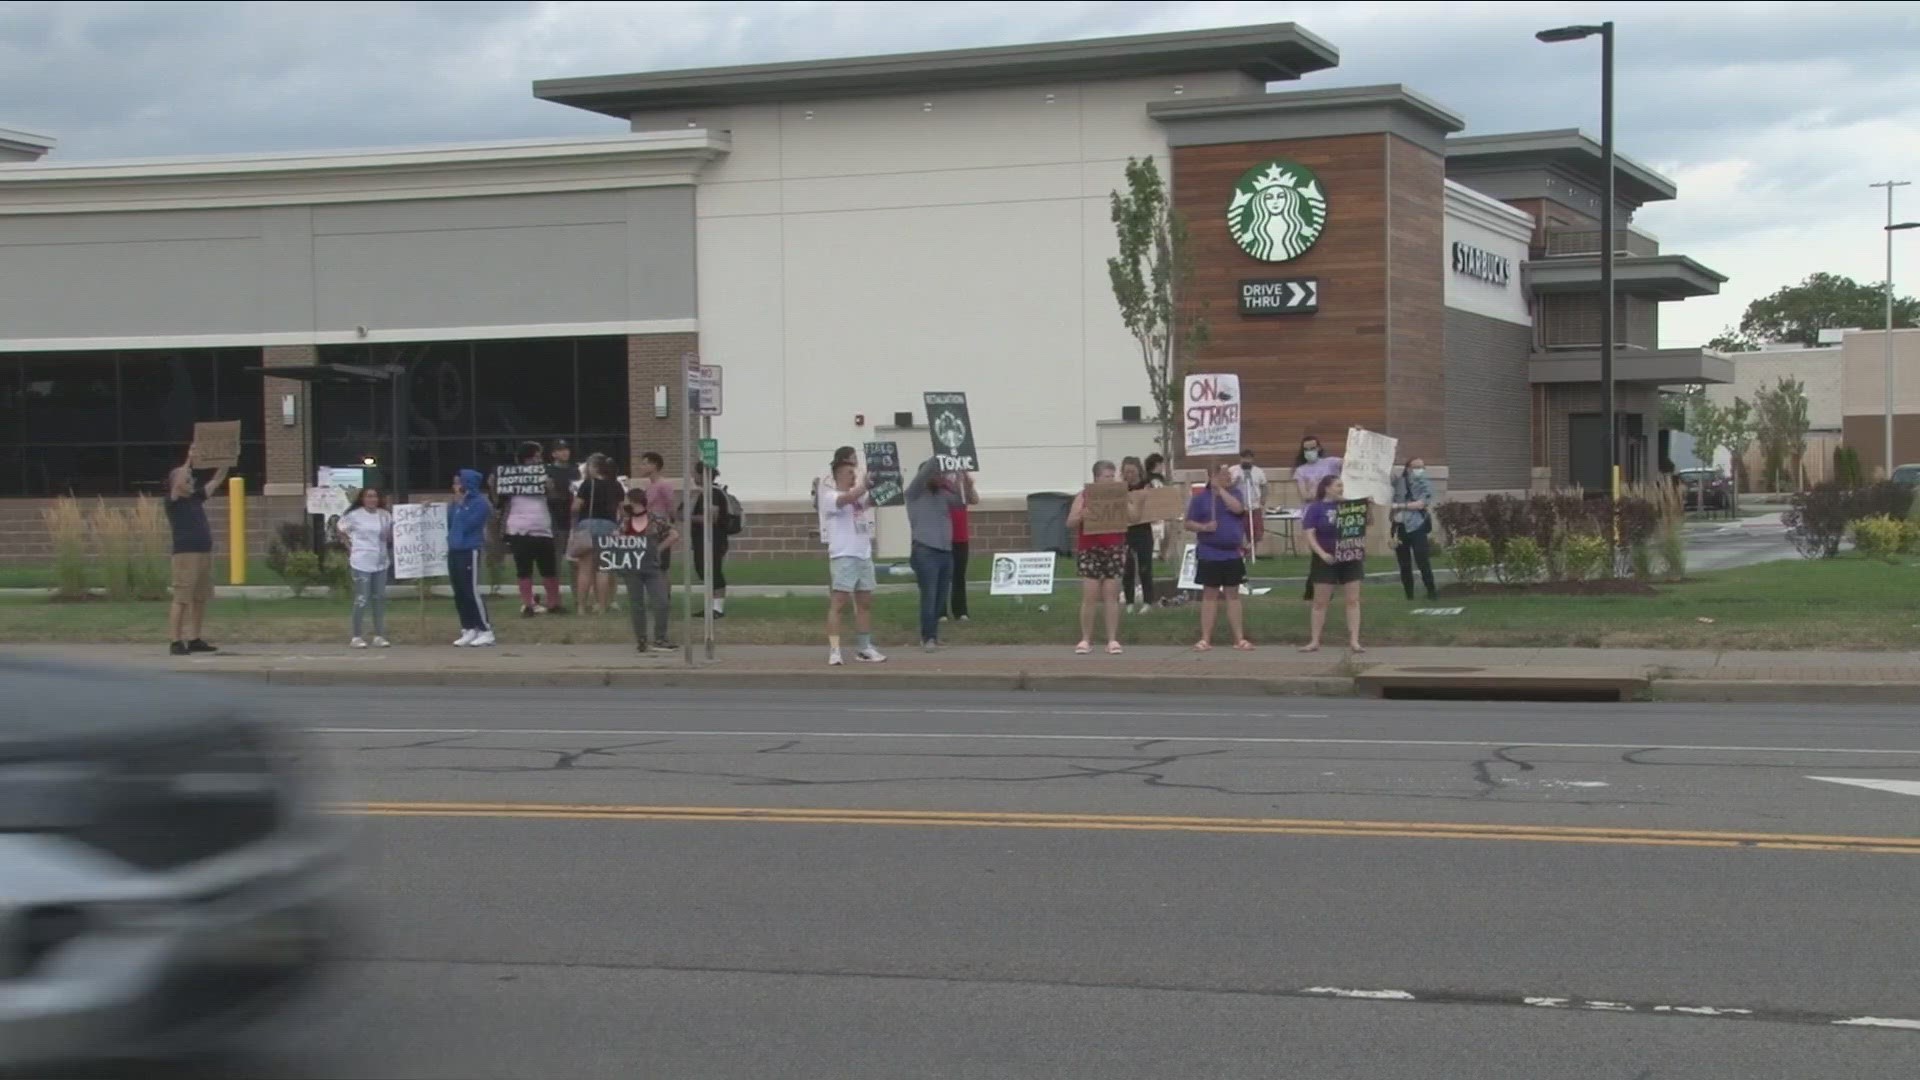 Starbucks fired another Buffalo-area union leader Alexis Rizzo. she worked at the Starbucks on Genesee St.